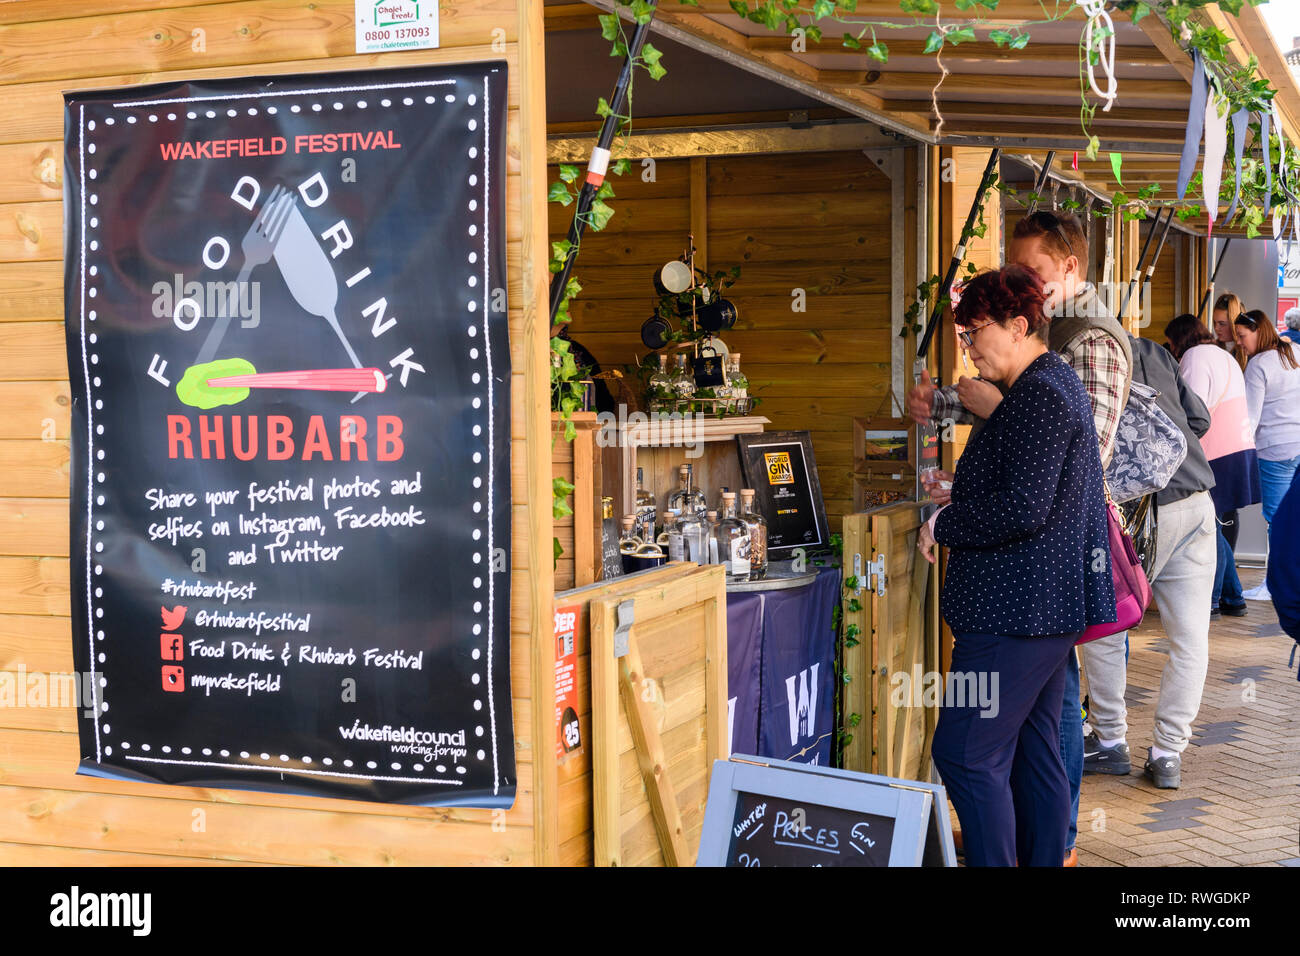 People shopping at busy Wakefield Food, Drink & Rhubarb Festival 2019 visiting market trade stall selling bottles of gin - West Yorkshire, England, UK Stock Photo